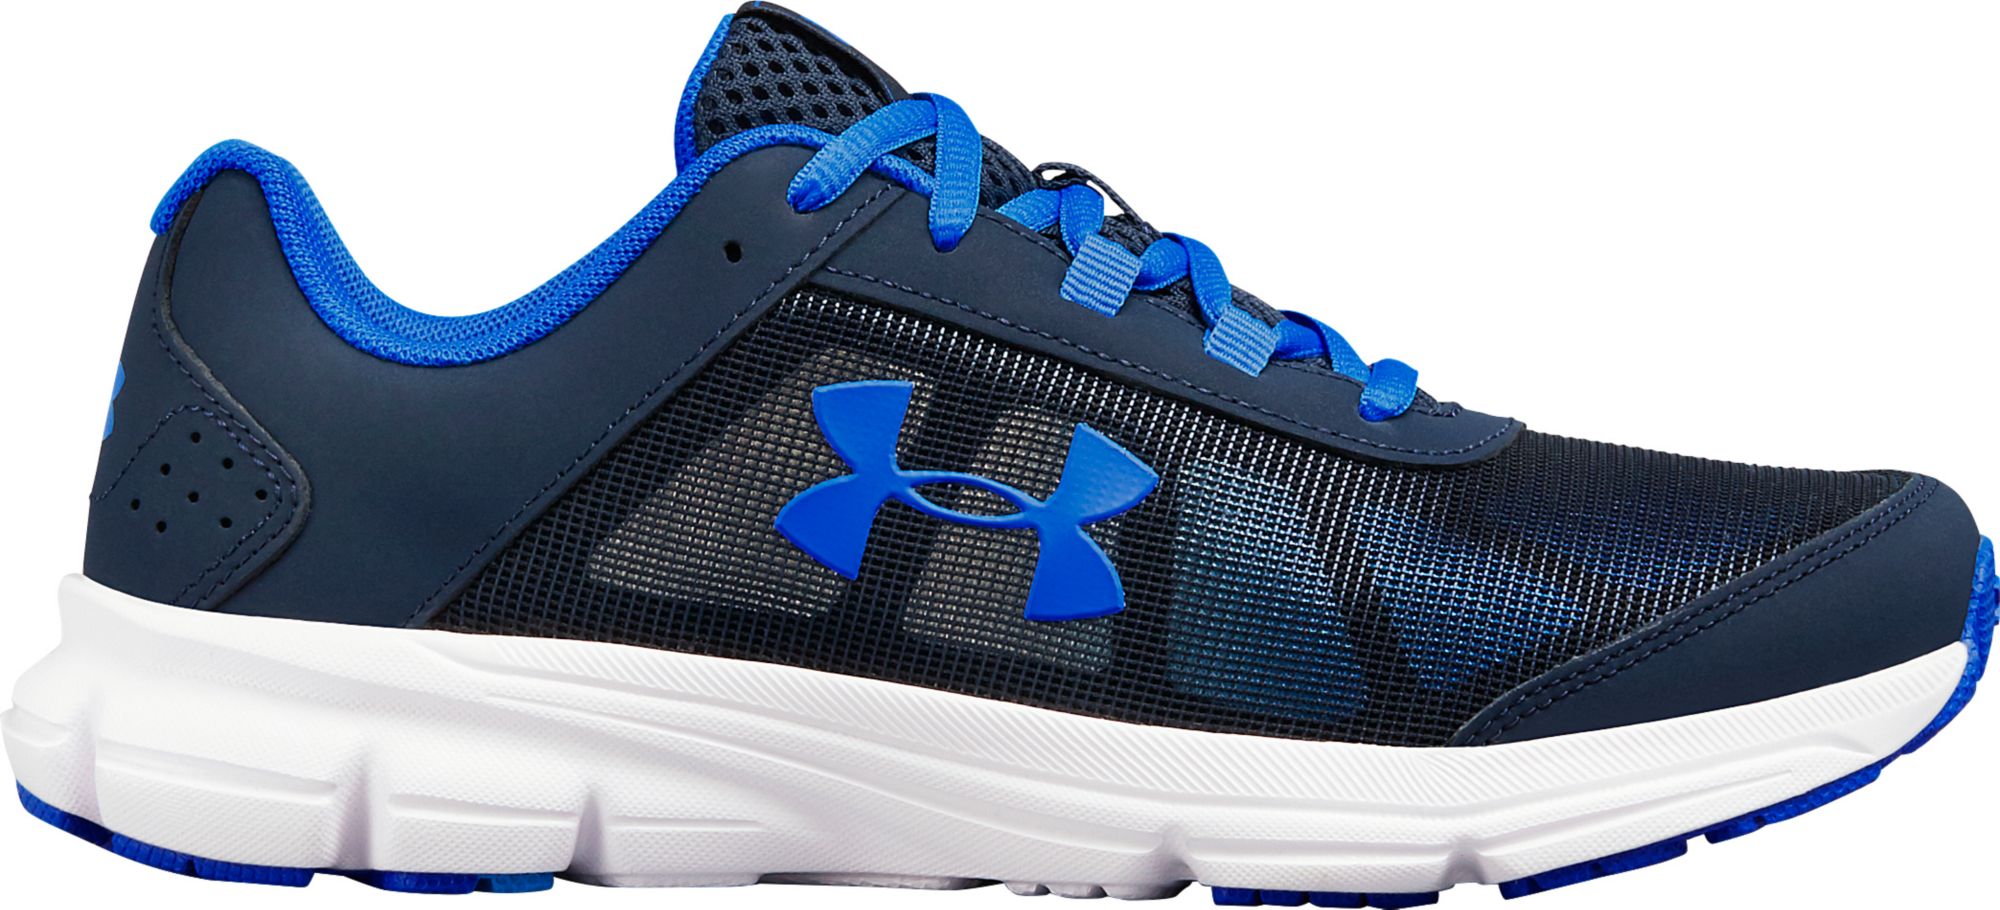 Under Armour Kids' Shoes | Best Price Guarantee at DICK'S